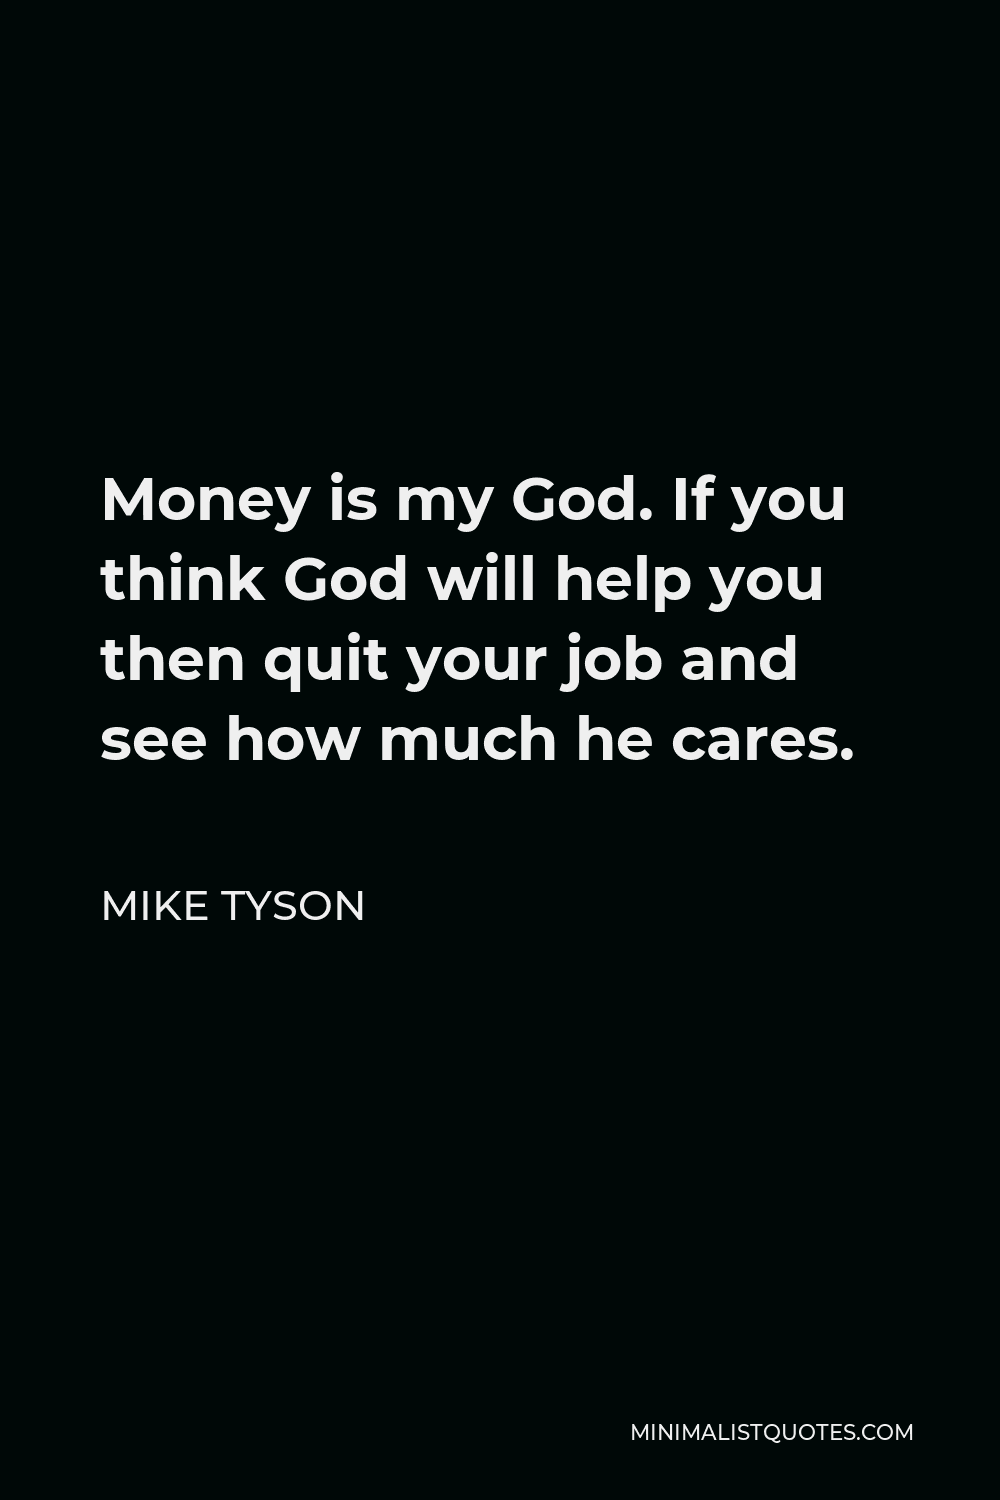 Mike Tyson Quote - Money is my God. If you think God will help you then quit your job and see how much he cares.